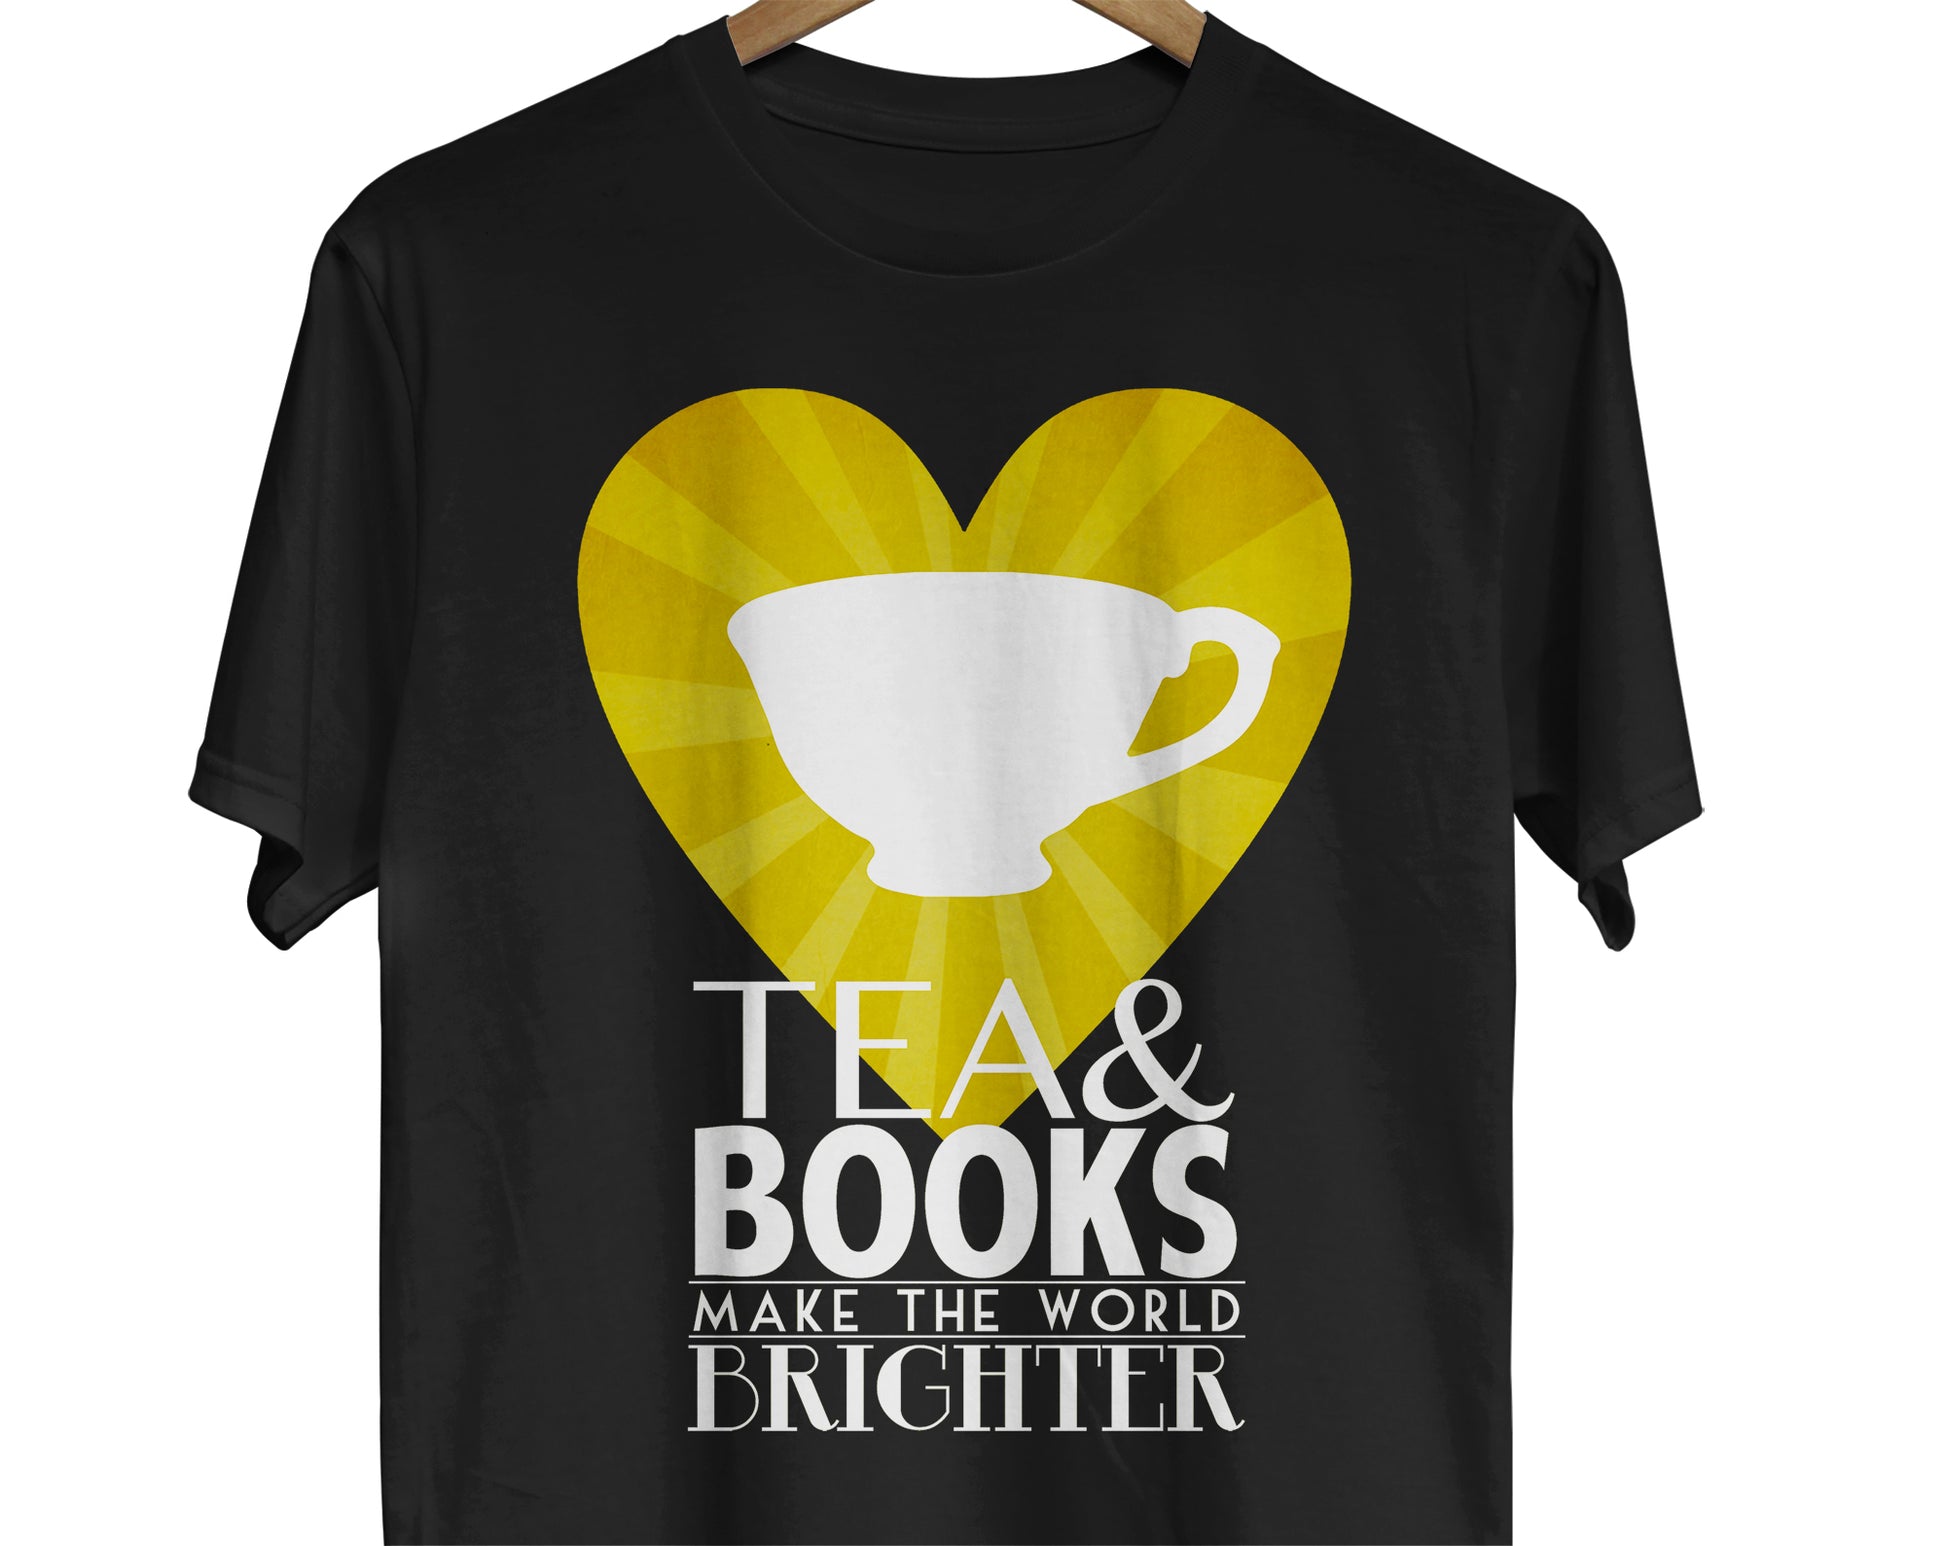 Tea & Book lover t-shirt for bookworm or librarian